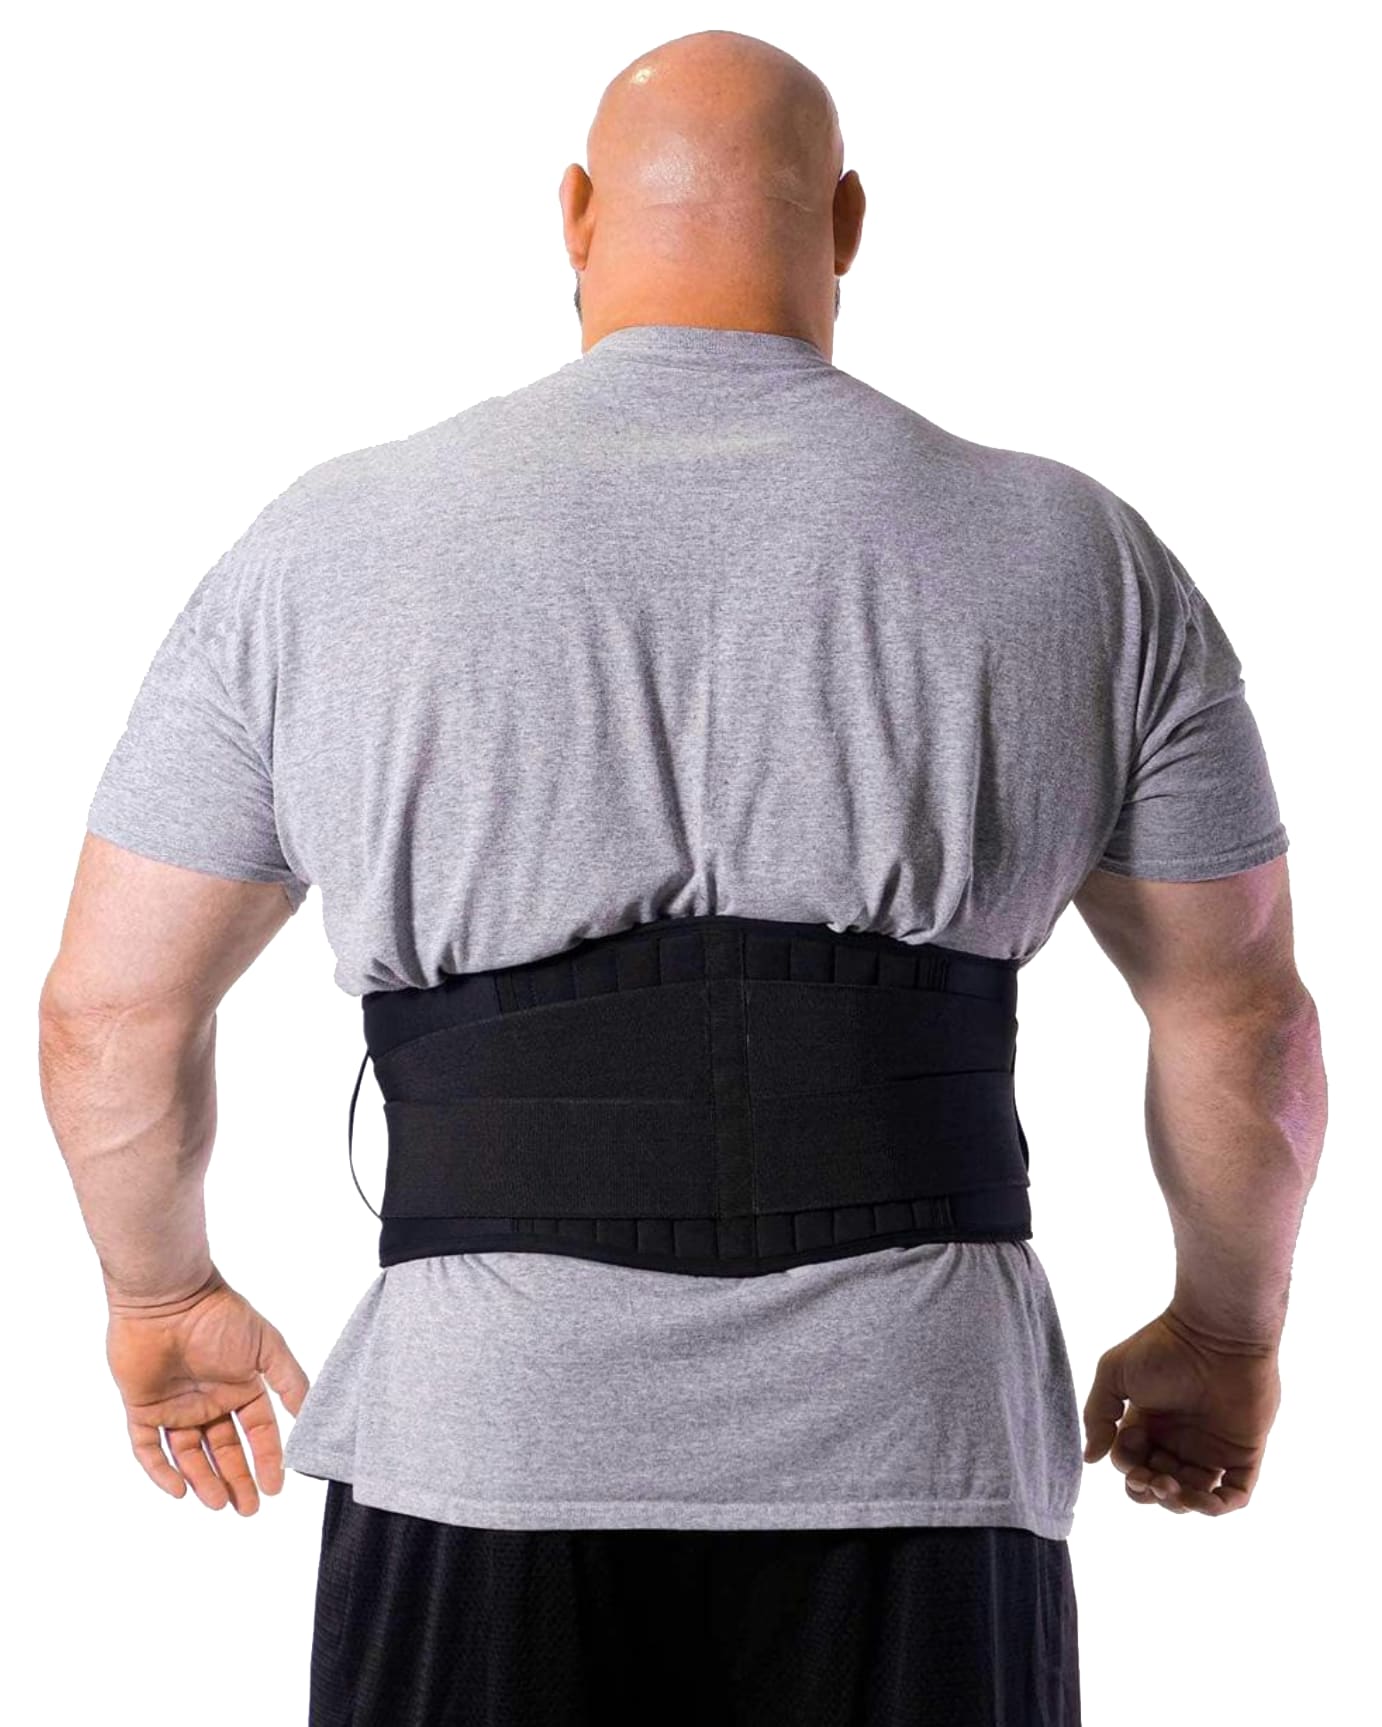 PMG Fitness 6" Weightlifting Neoprene Fully lined Lumbar Pad Back Support 